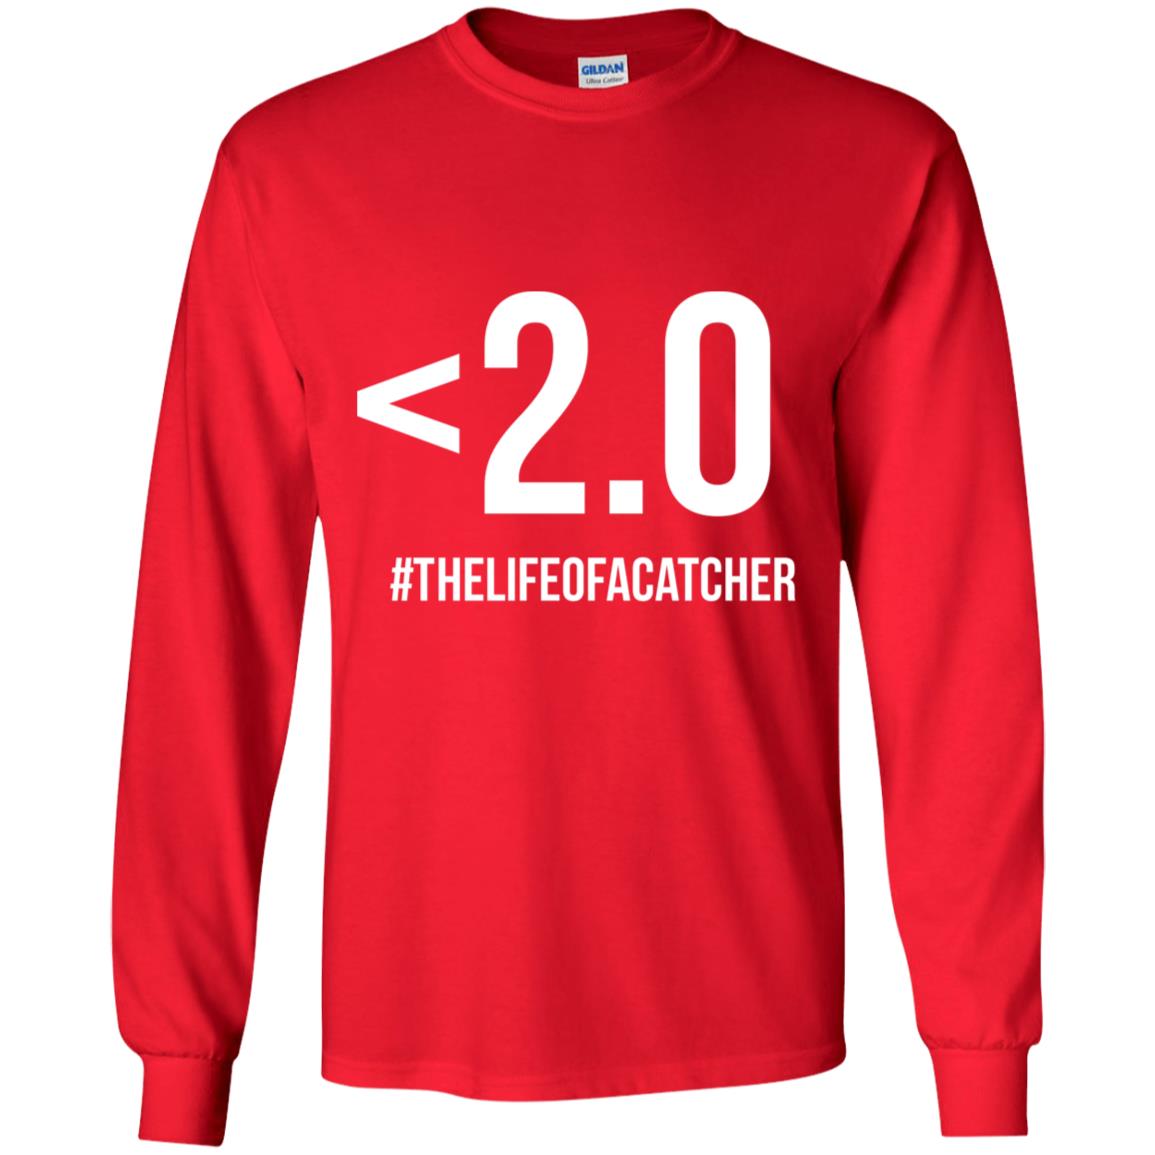 The Catching Guy Drop Your Pop < 2.0 Youth Long Sleeve Tee red